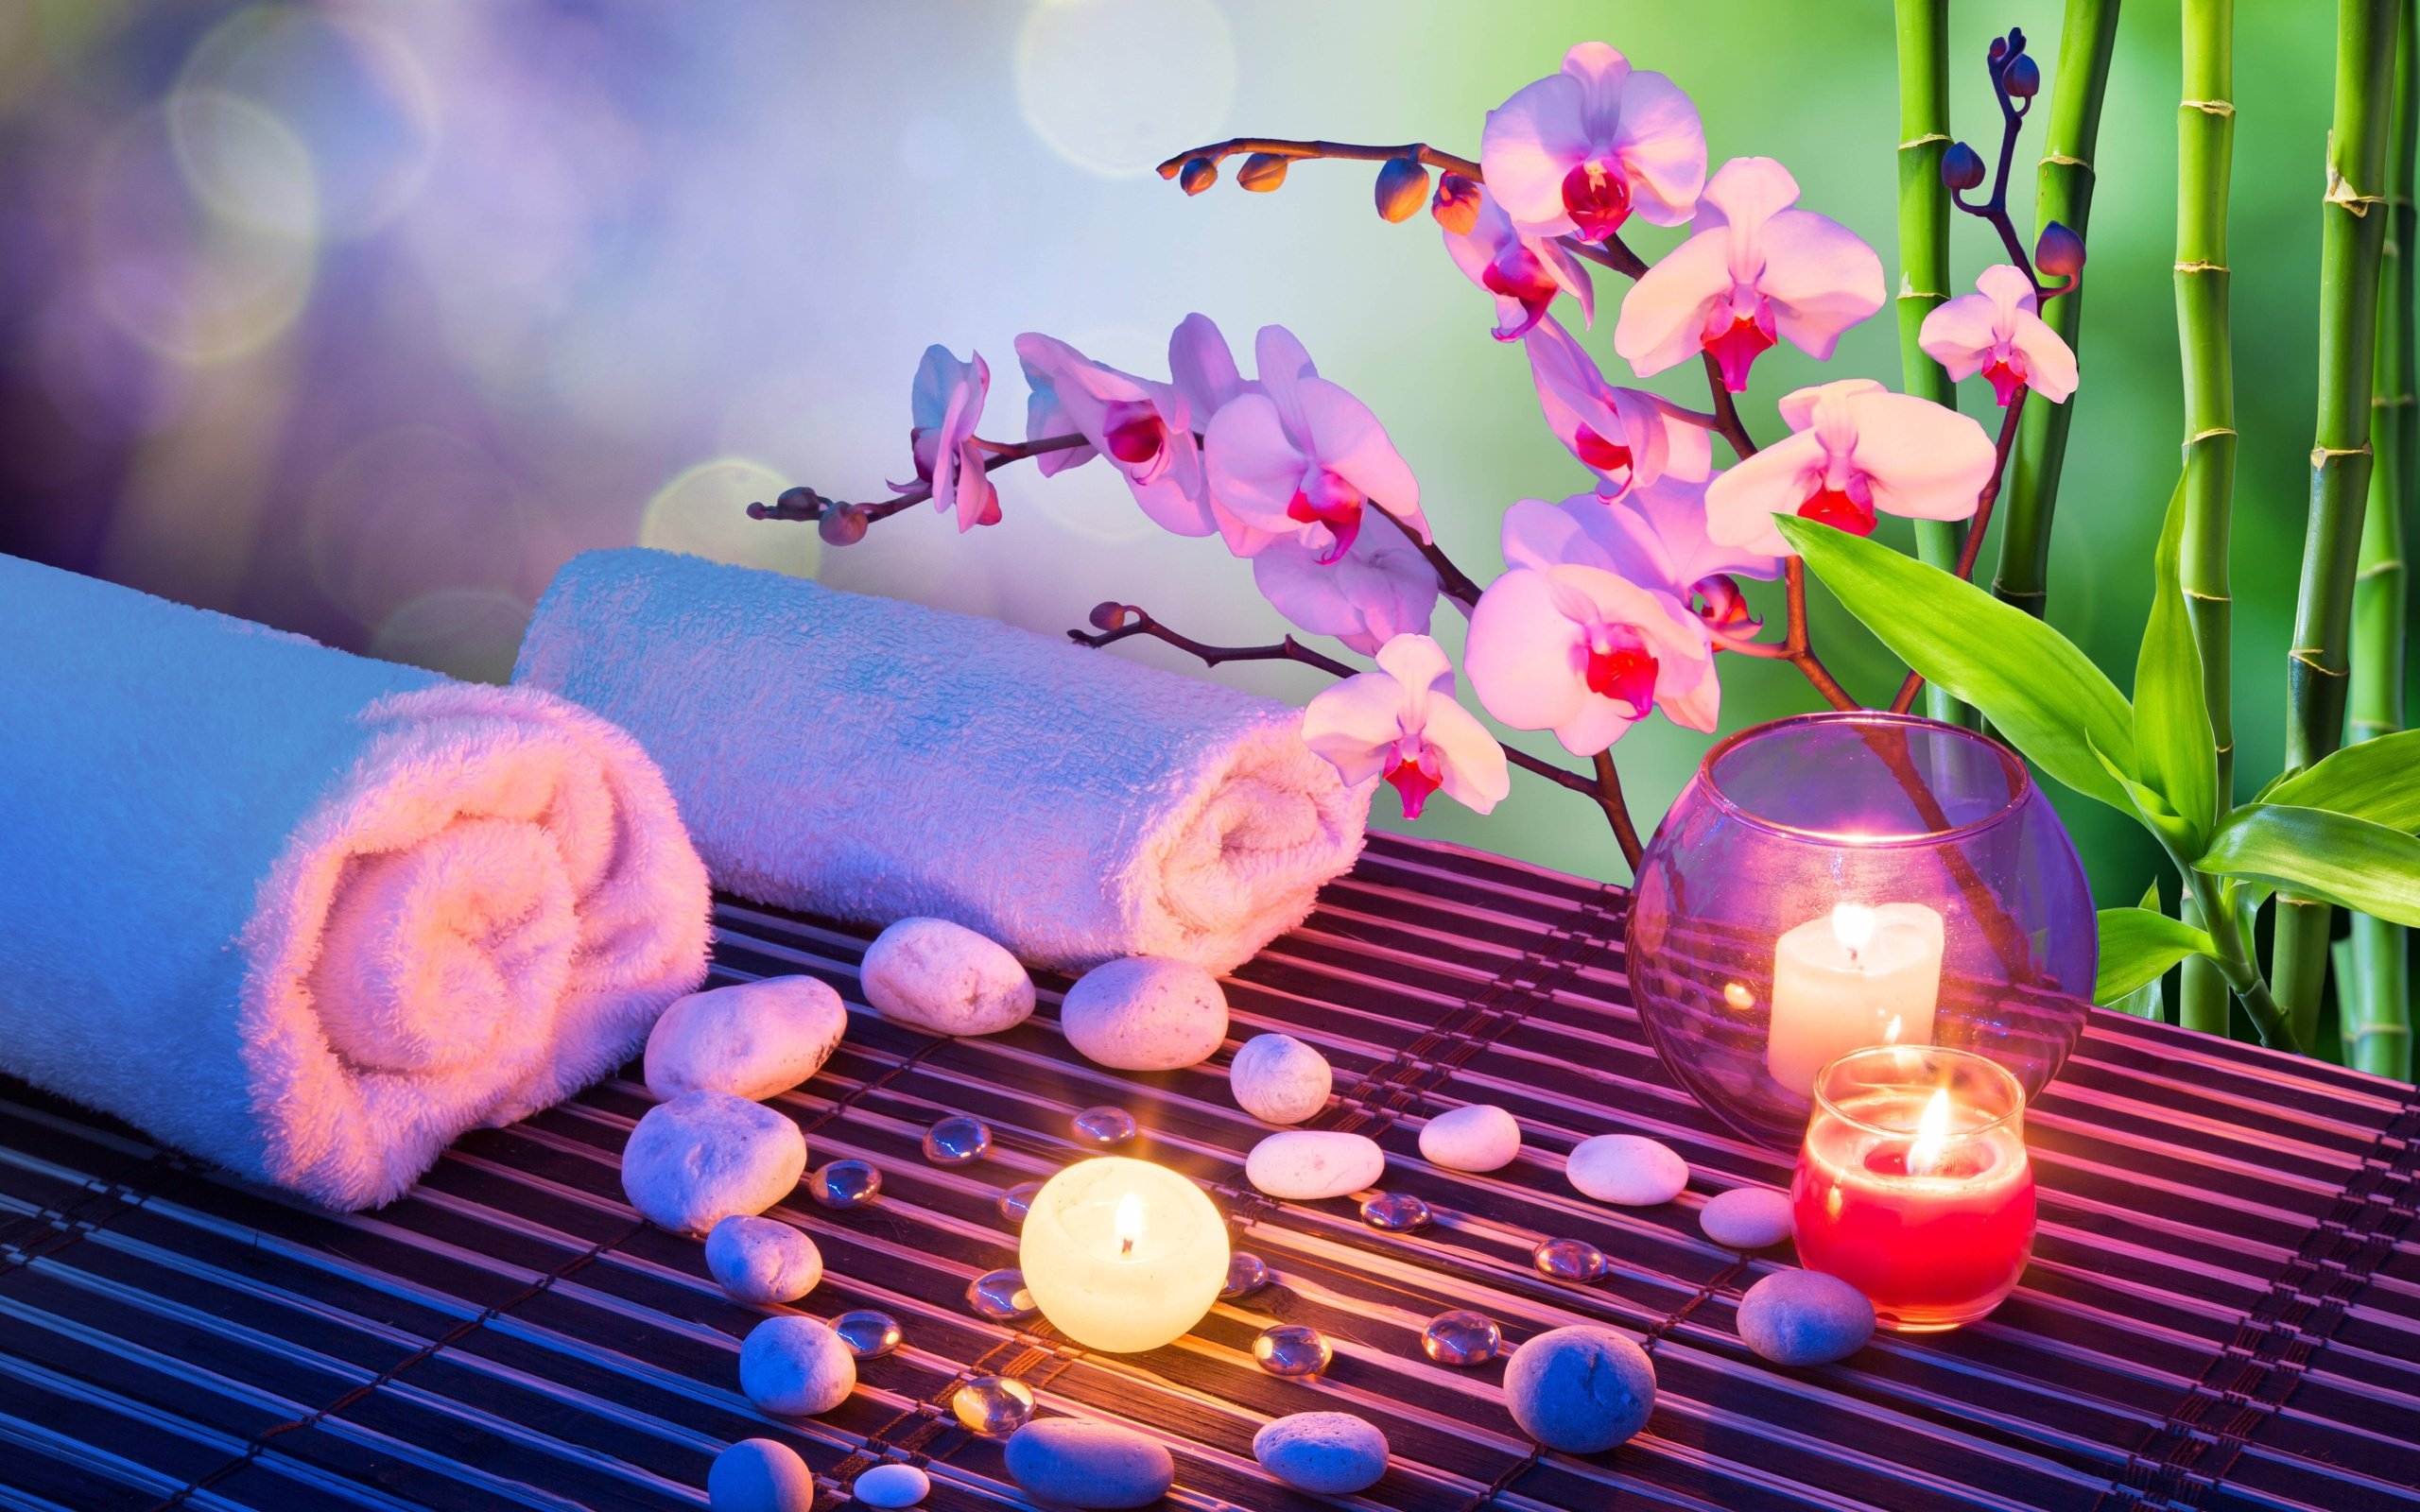 heart, Stones, Candles, Orchids, Towels, Bamboo, Bokeh, Mood Wallpaper